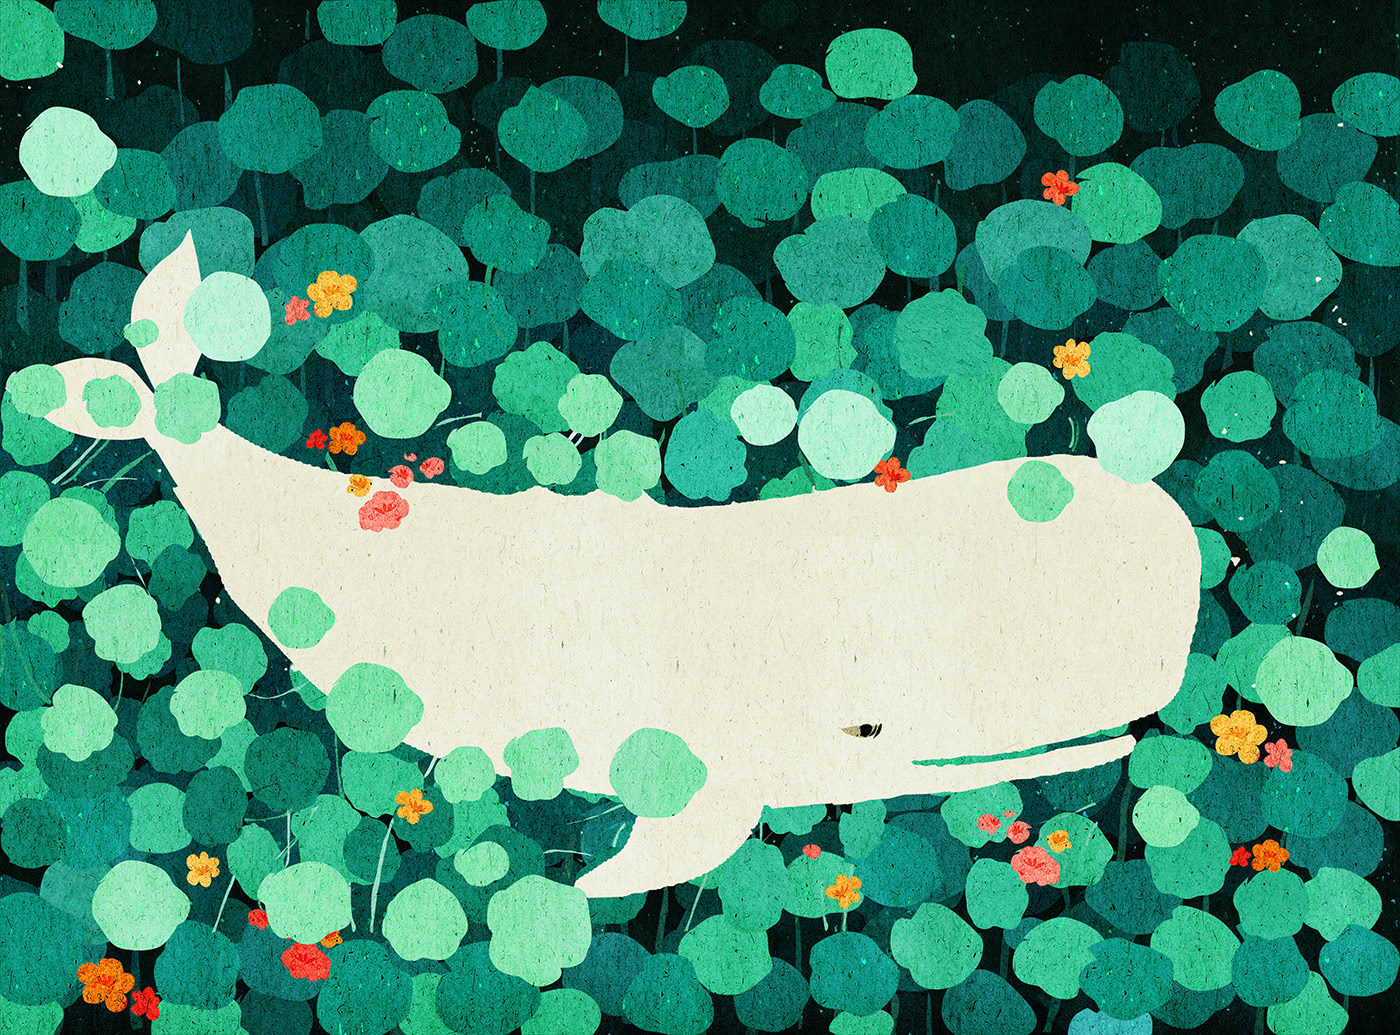 A Curious Whale Explores Dry Land in Quirky, Melancholic Illustrations by Xuan Loc Xuan